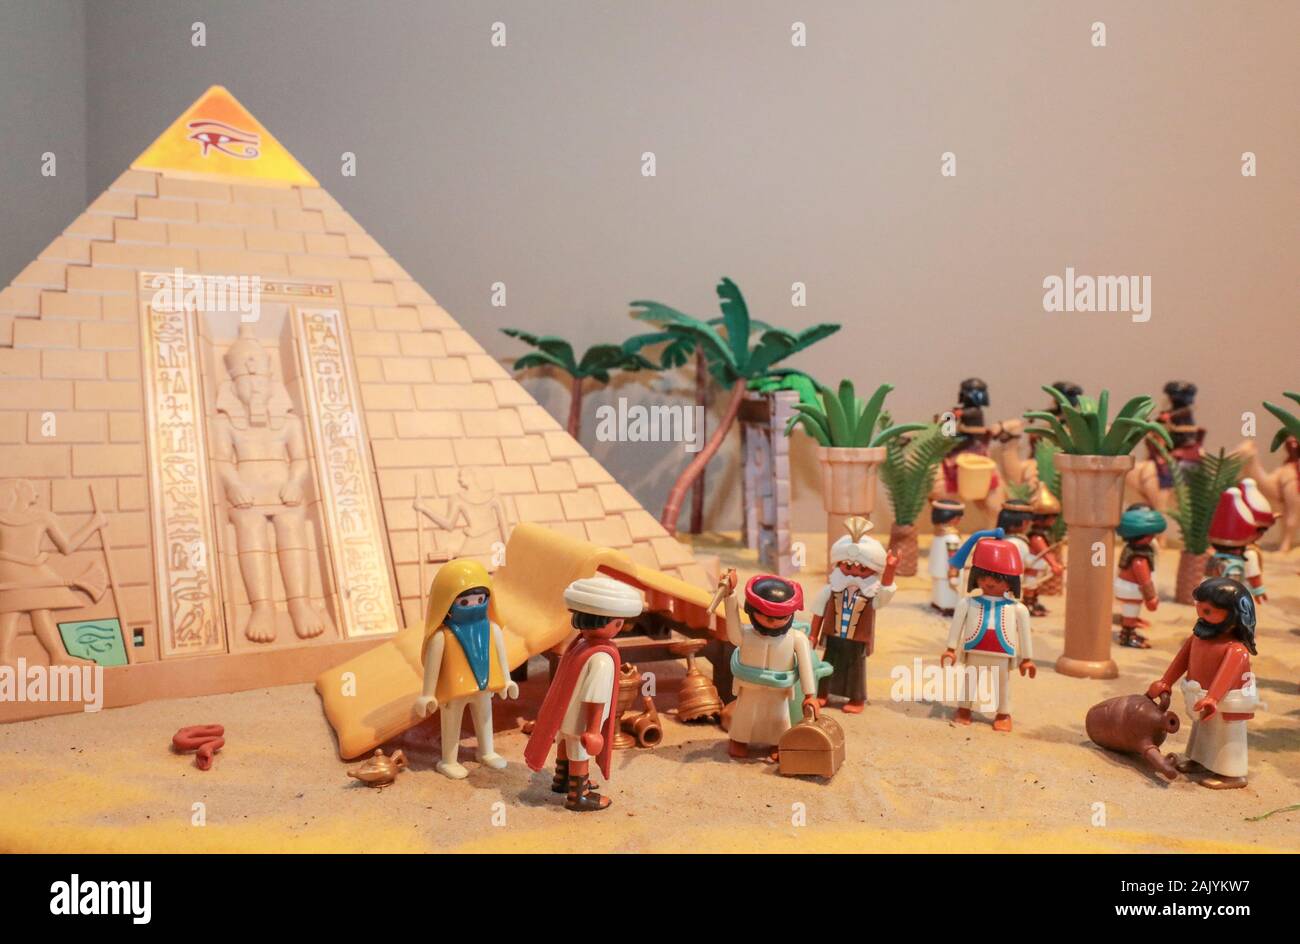 Playmobil History High Resolution Stock Photography and Images - Alamy